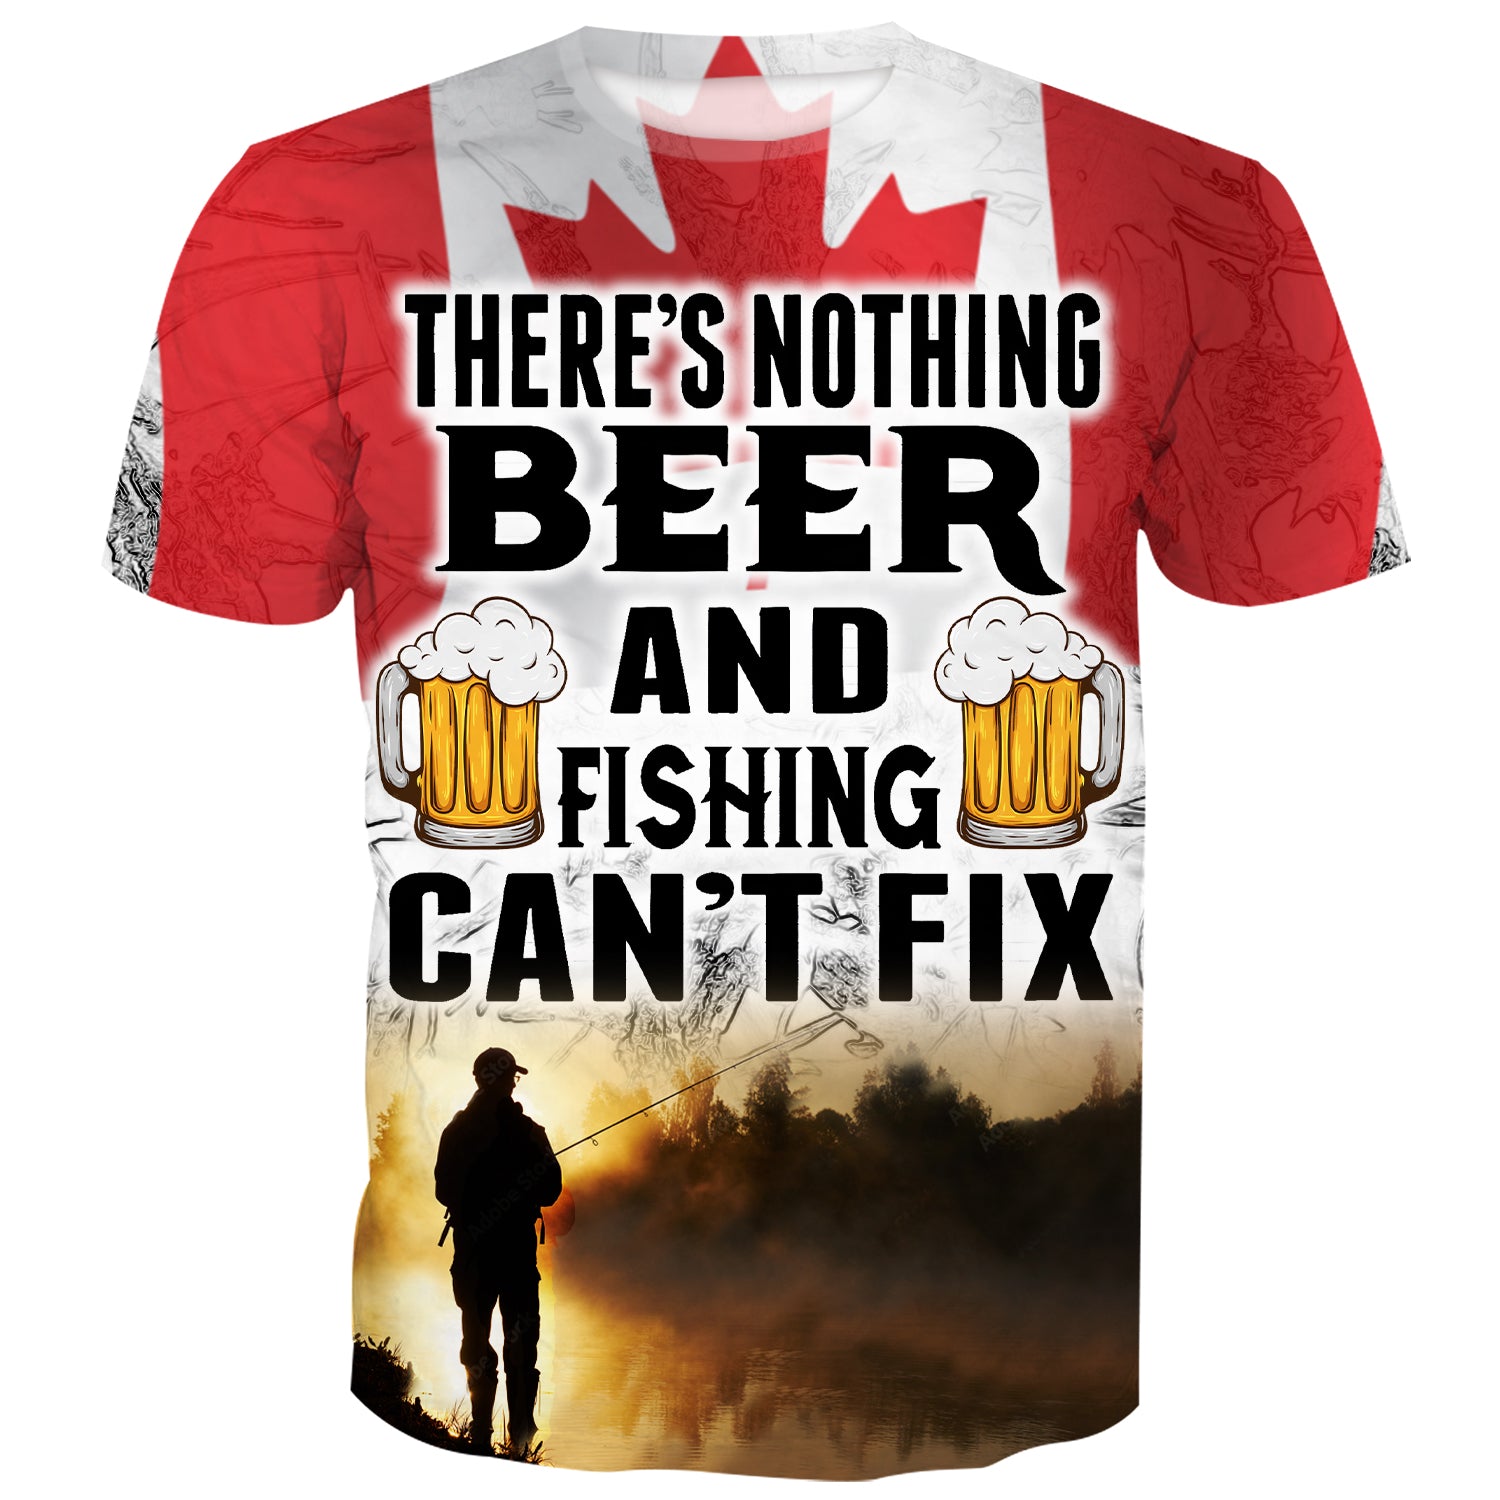 There's nothing beer and fishing can't fix - Canadian Flag T-Shirt